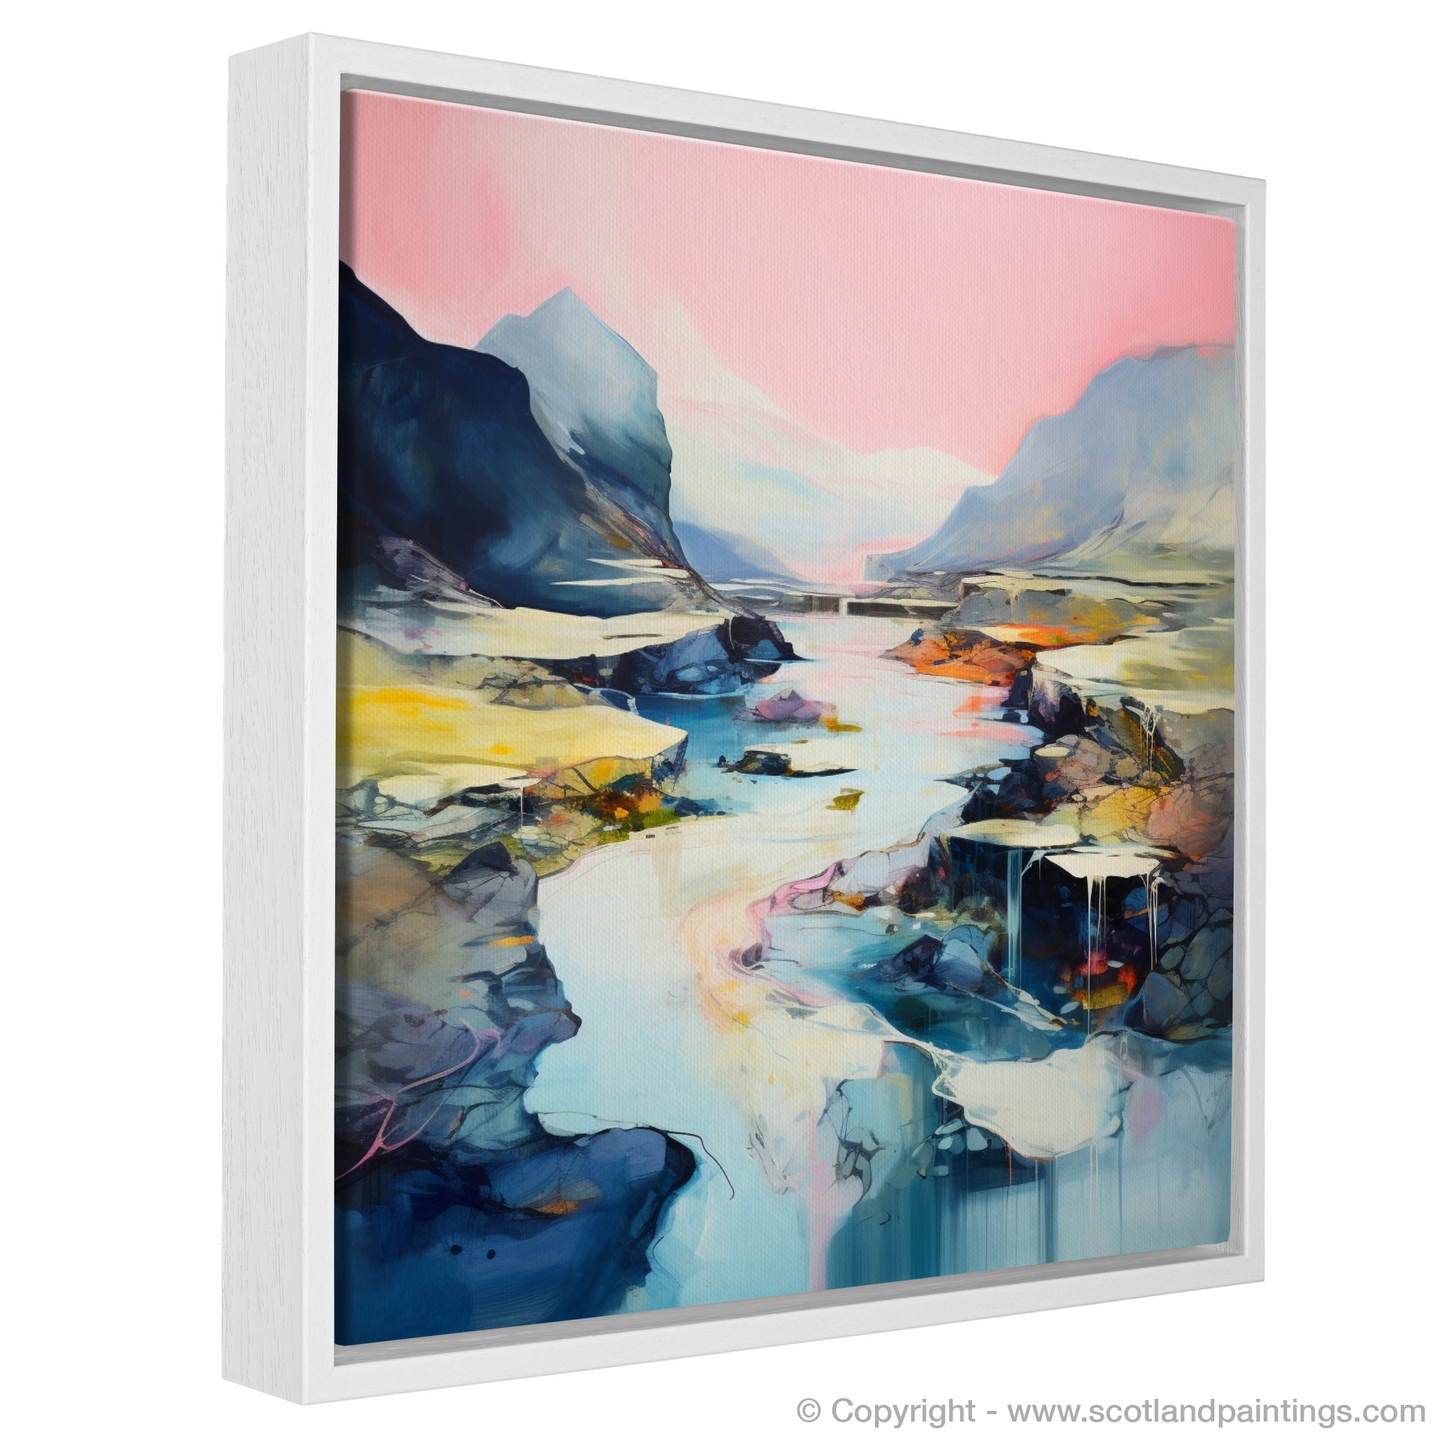 Painting and Art Print of Isle of Skye Fairy Pools at dusk in summer entitled "Ethereal Twilight at Isle of Skye Fairy Pools".